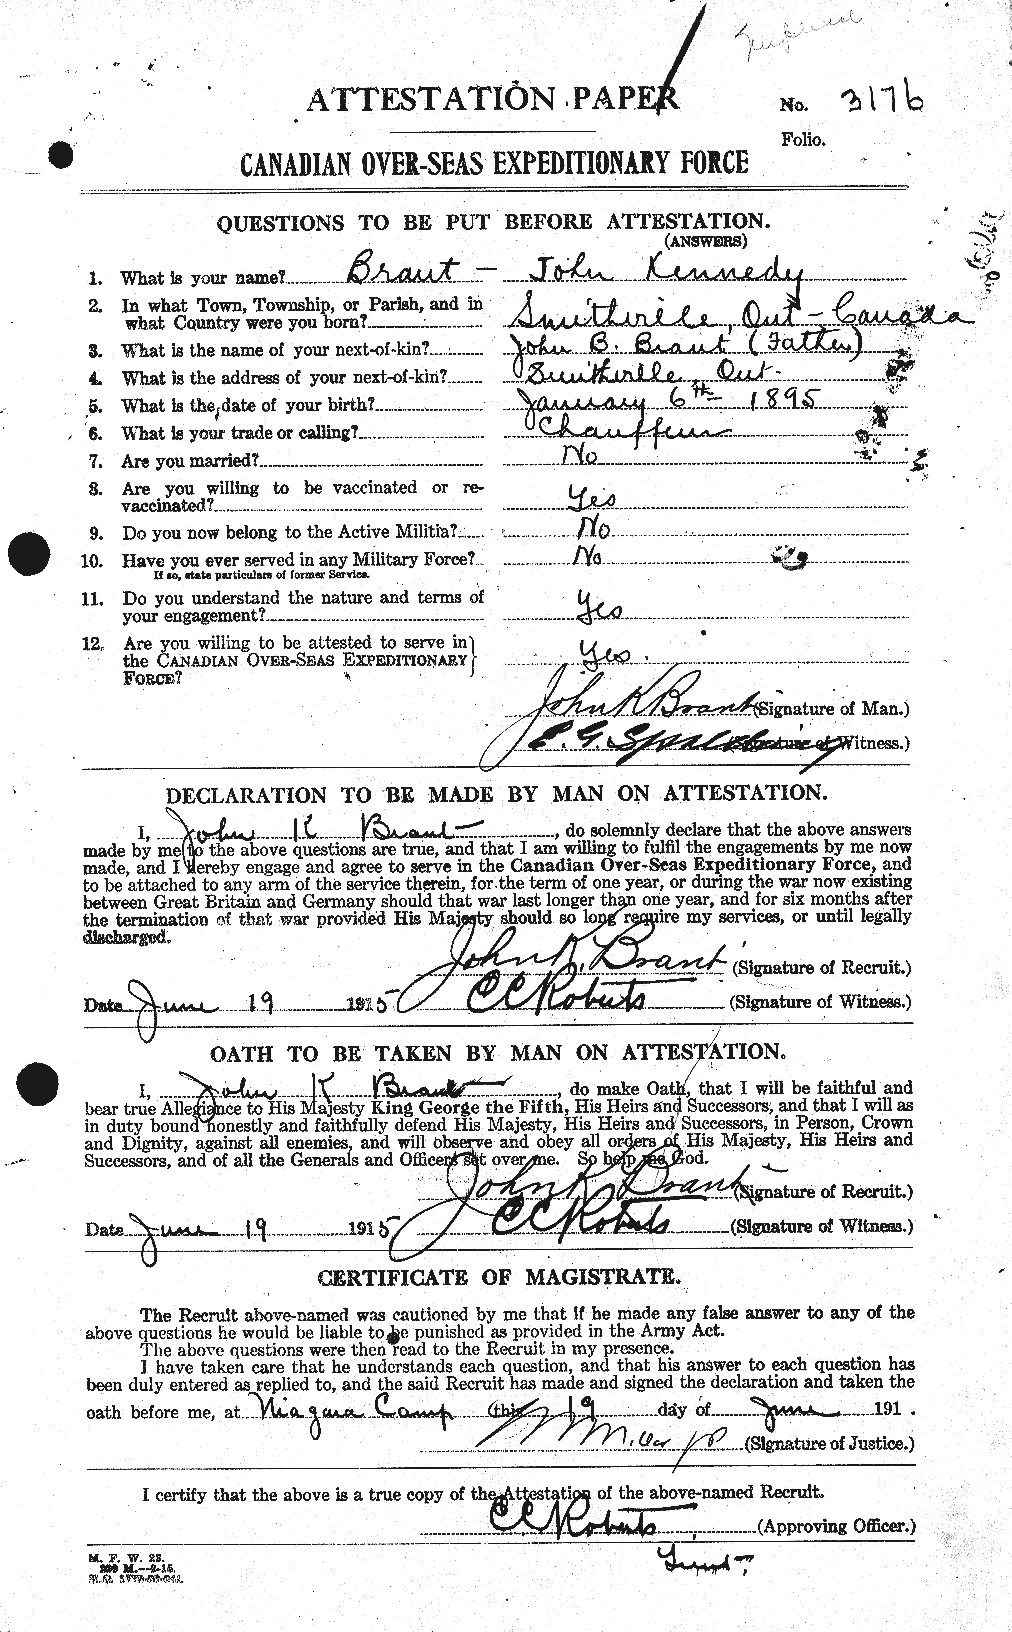 Personnel Records of the First World War - CEF 257859a